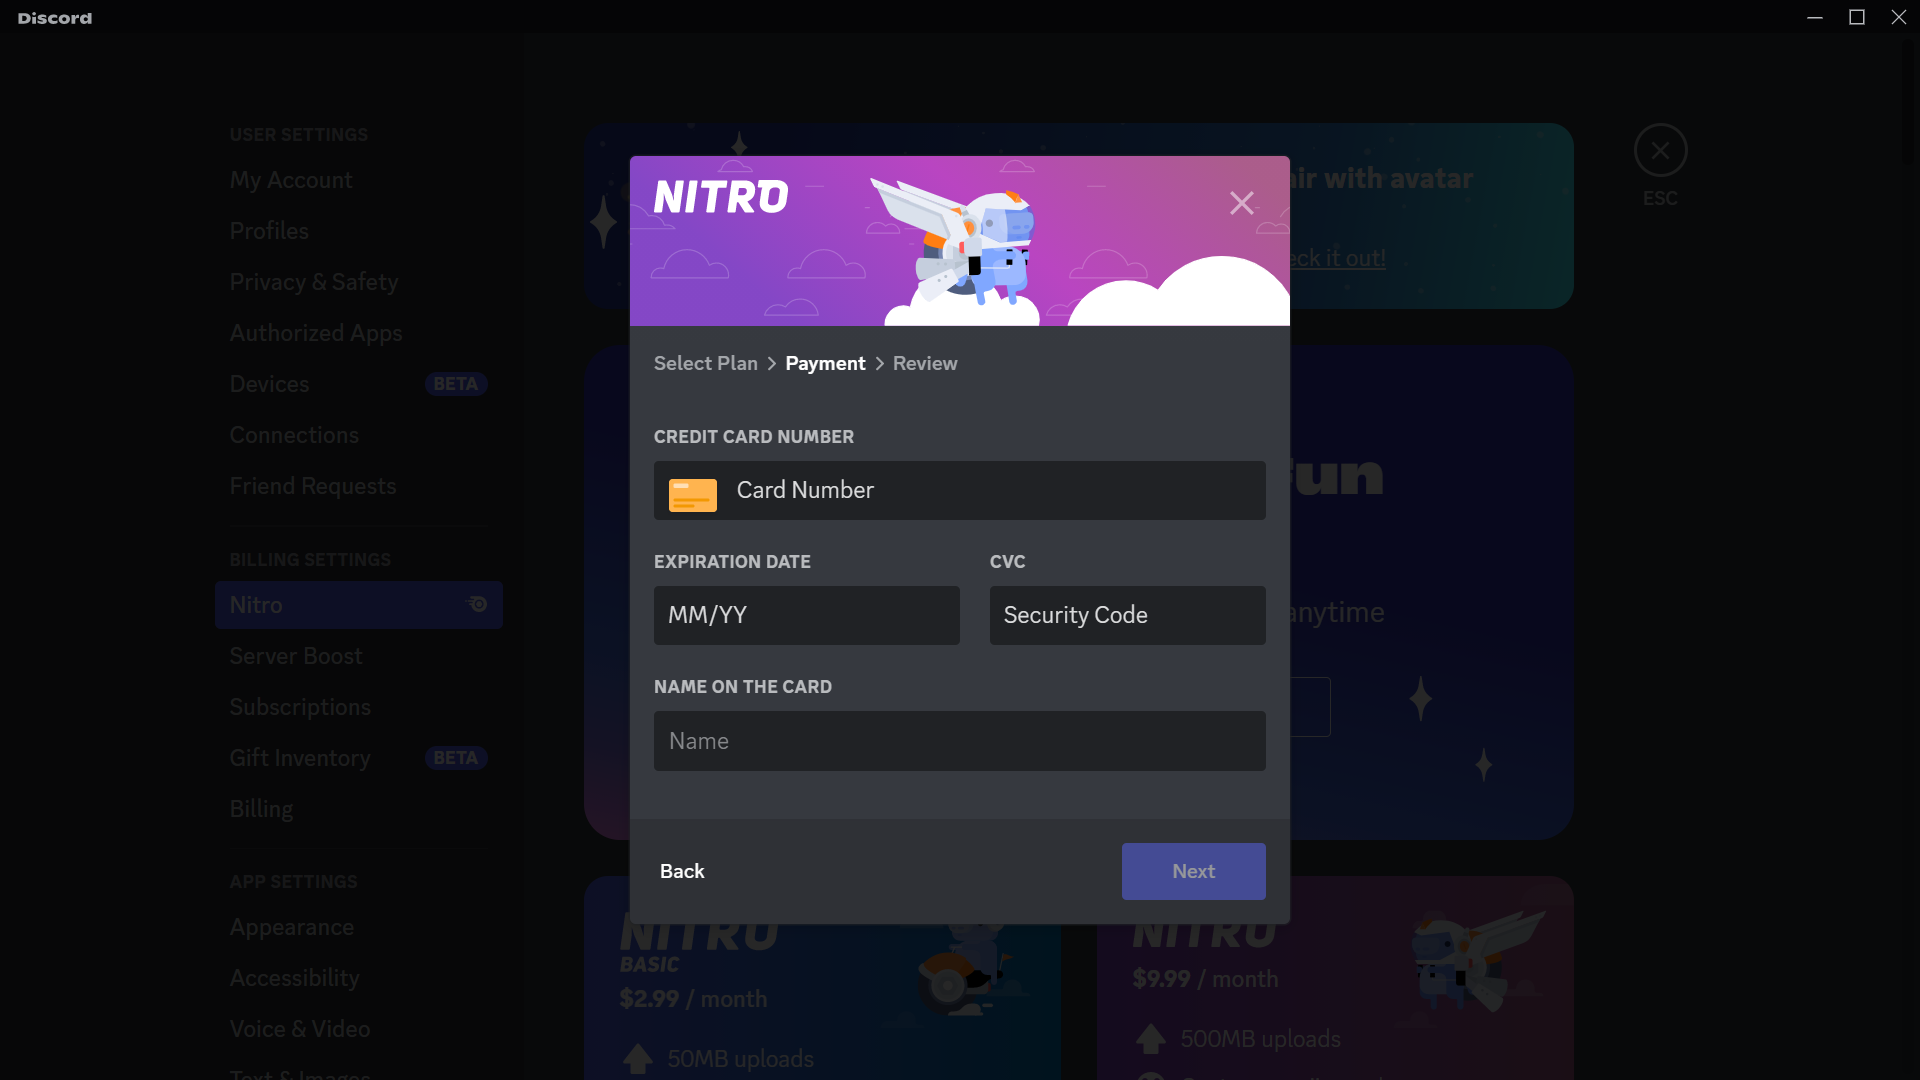 Screenshot for inputting card details for Nitro subscription